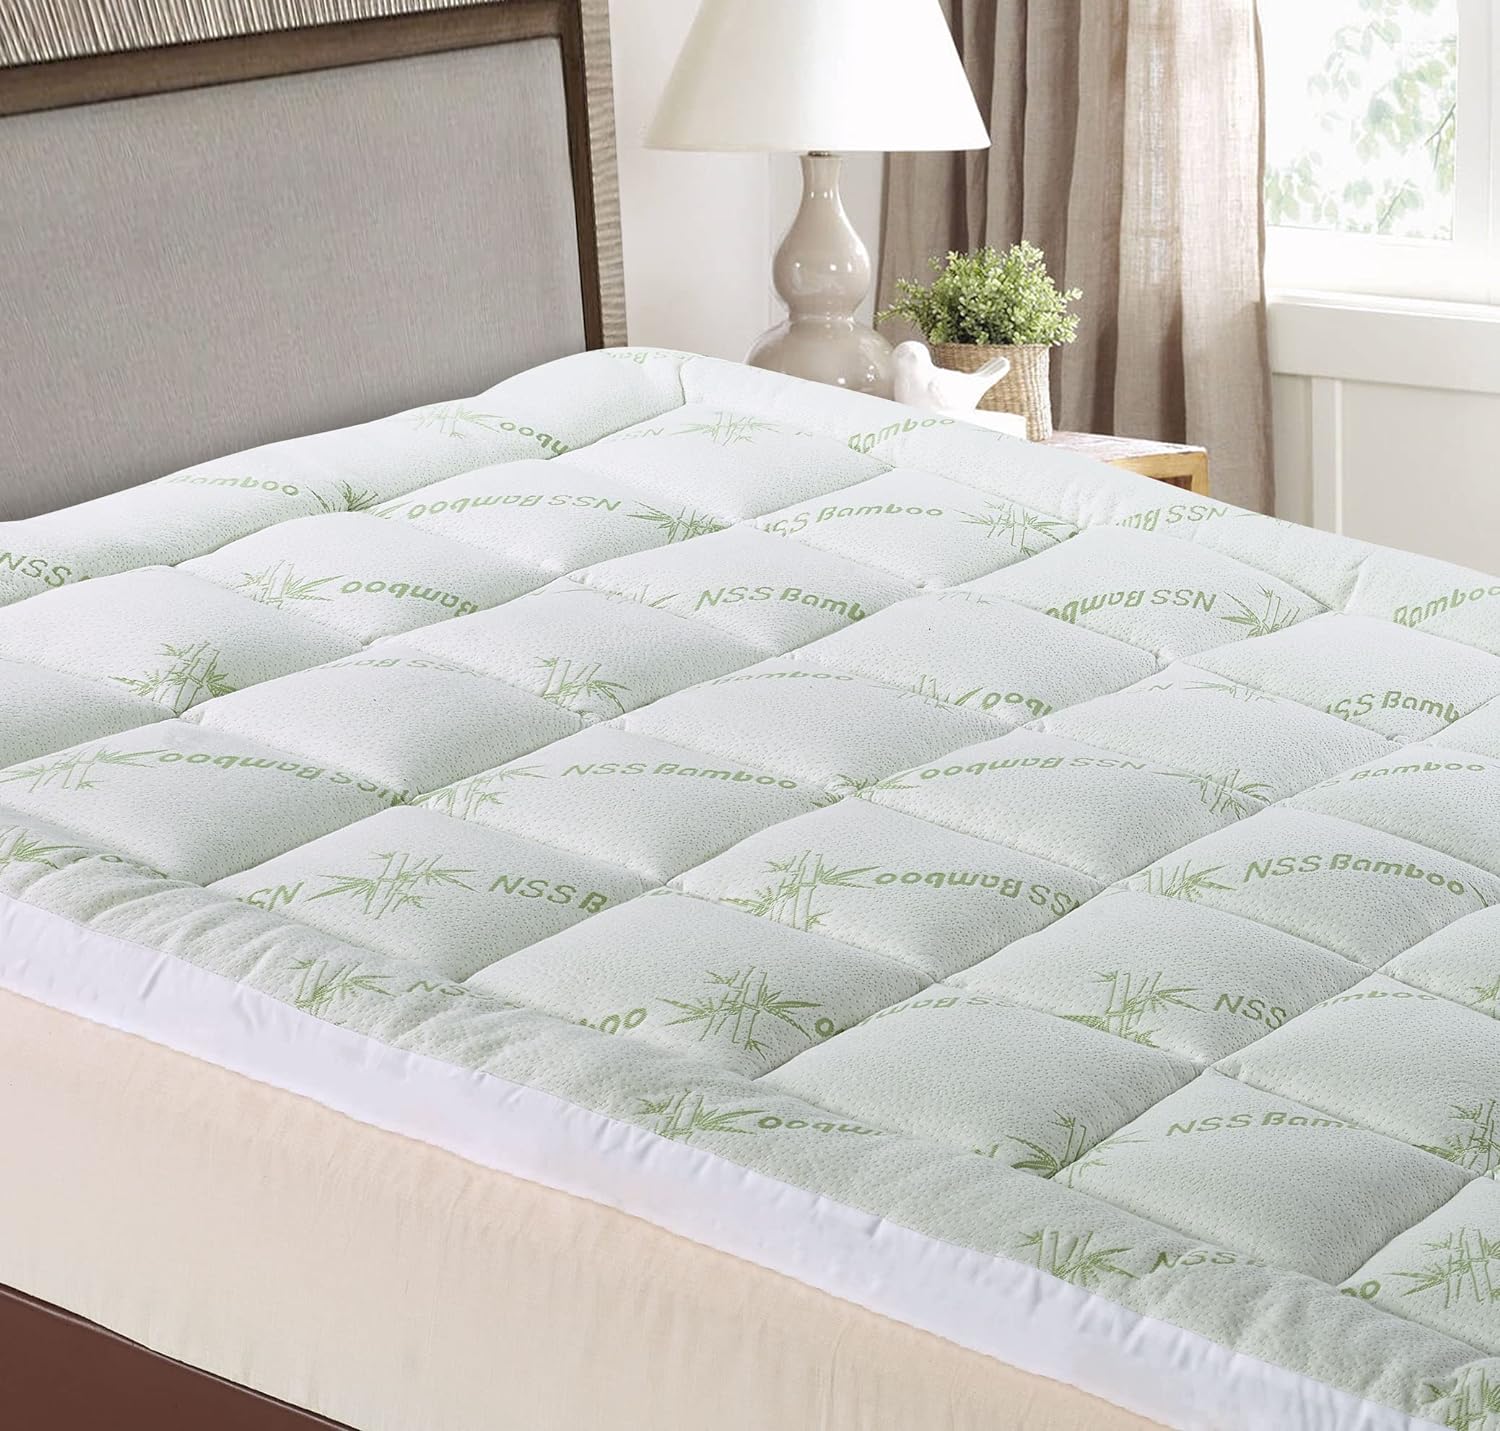 Bamboo Twin Gusset 39x75 Inches Soft Cooling Plush Down Alternative Quilted 4 Corner Skirt Protector Mattress Pad Reviver Enhancer (Viscose Made from Bamboo)